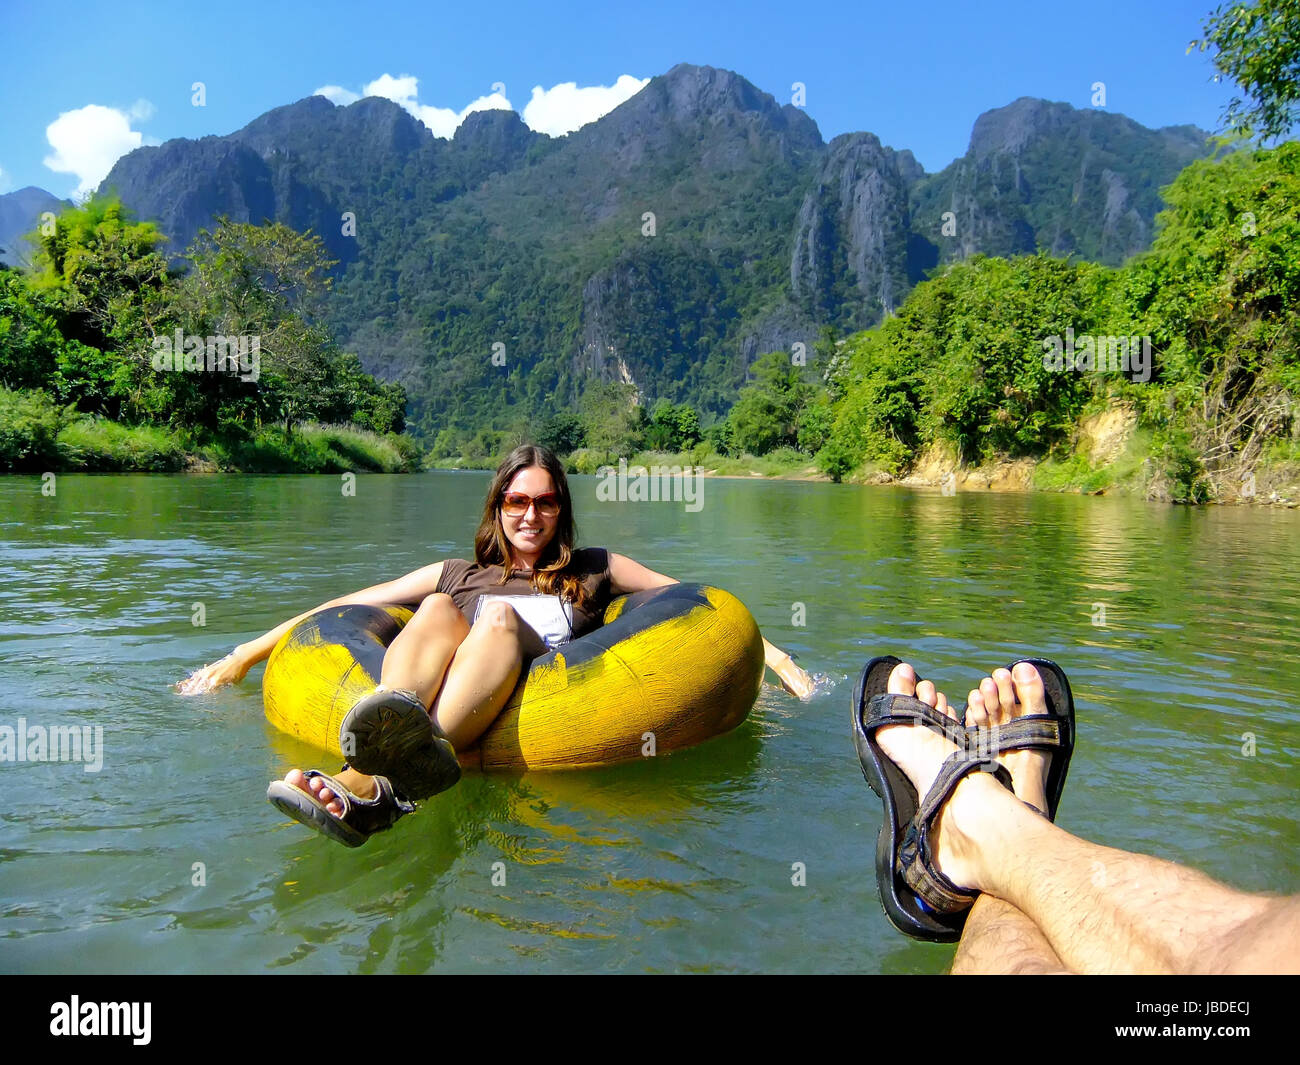 Couple going down Nam Song River in a tube surrounded by karst scenery in Vang Vieng, Laos. Tubing is a popular tourist activity in Vang Vieng. Stock Photo